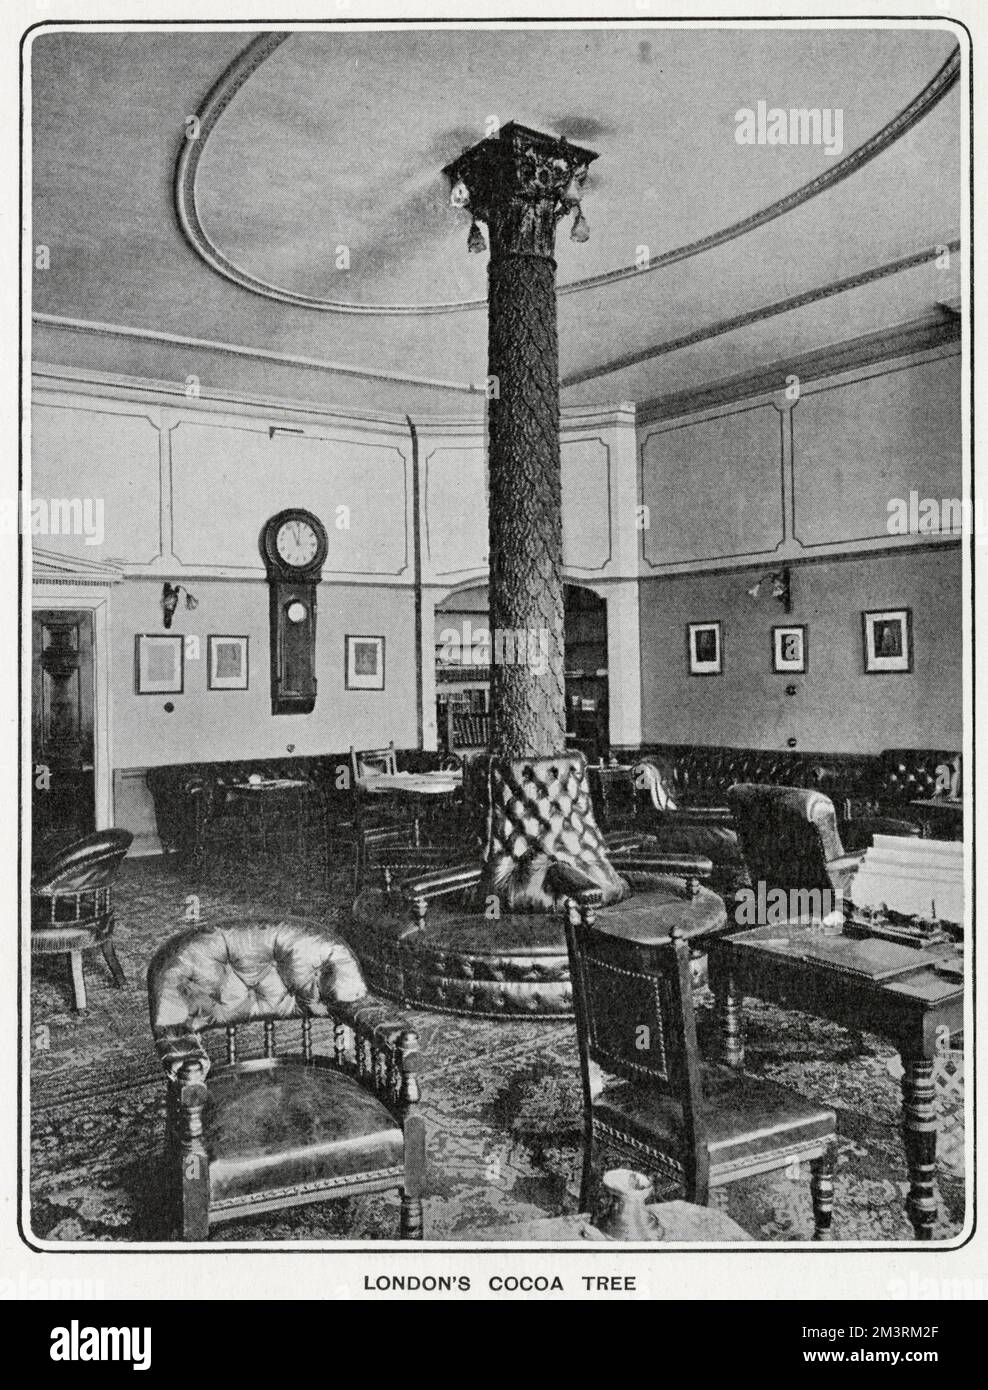 Interior of the Cocoa Tree Club, said to be the oldest club in London, showing the 'tree', which went up through two floors. It was originally a Tory chocolate house and also famous for once being the Jacobite Party H.Q. Lord Byron was a member. Stock Photo